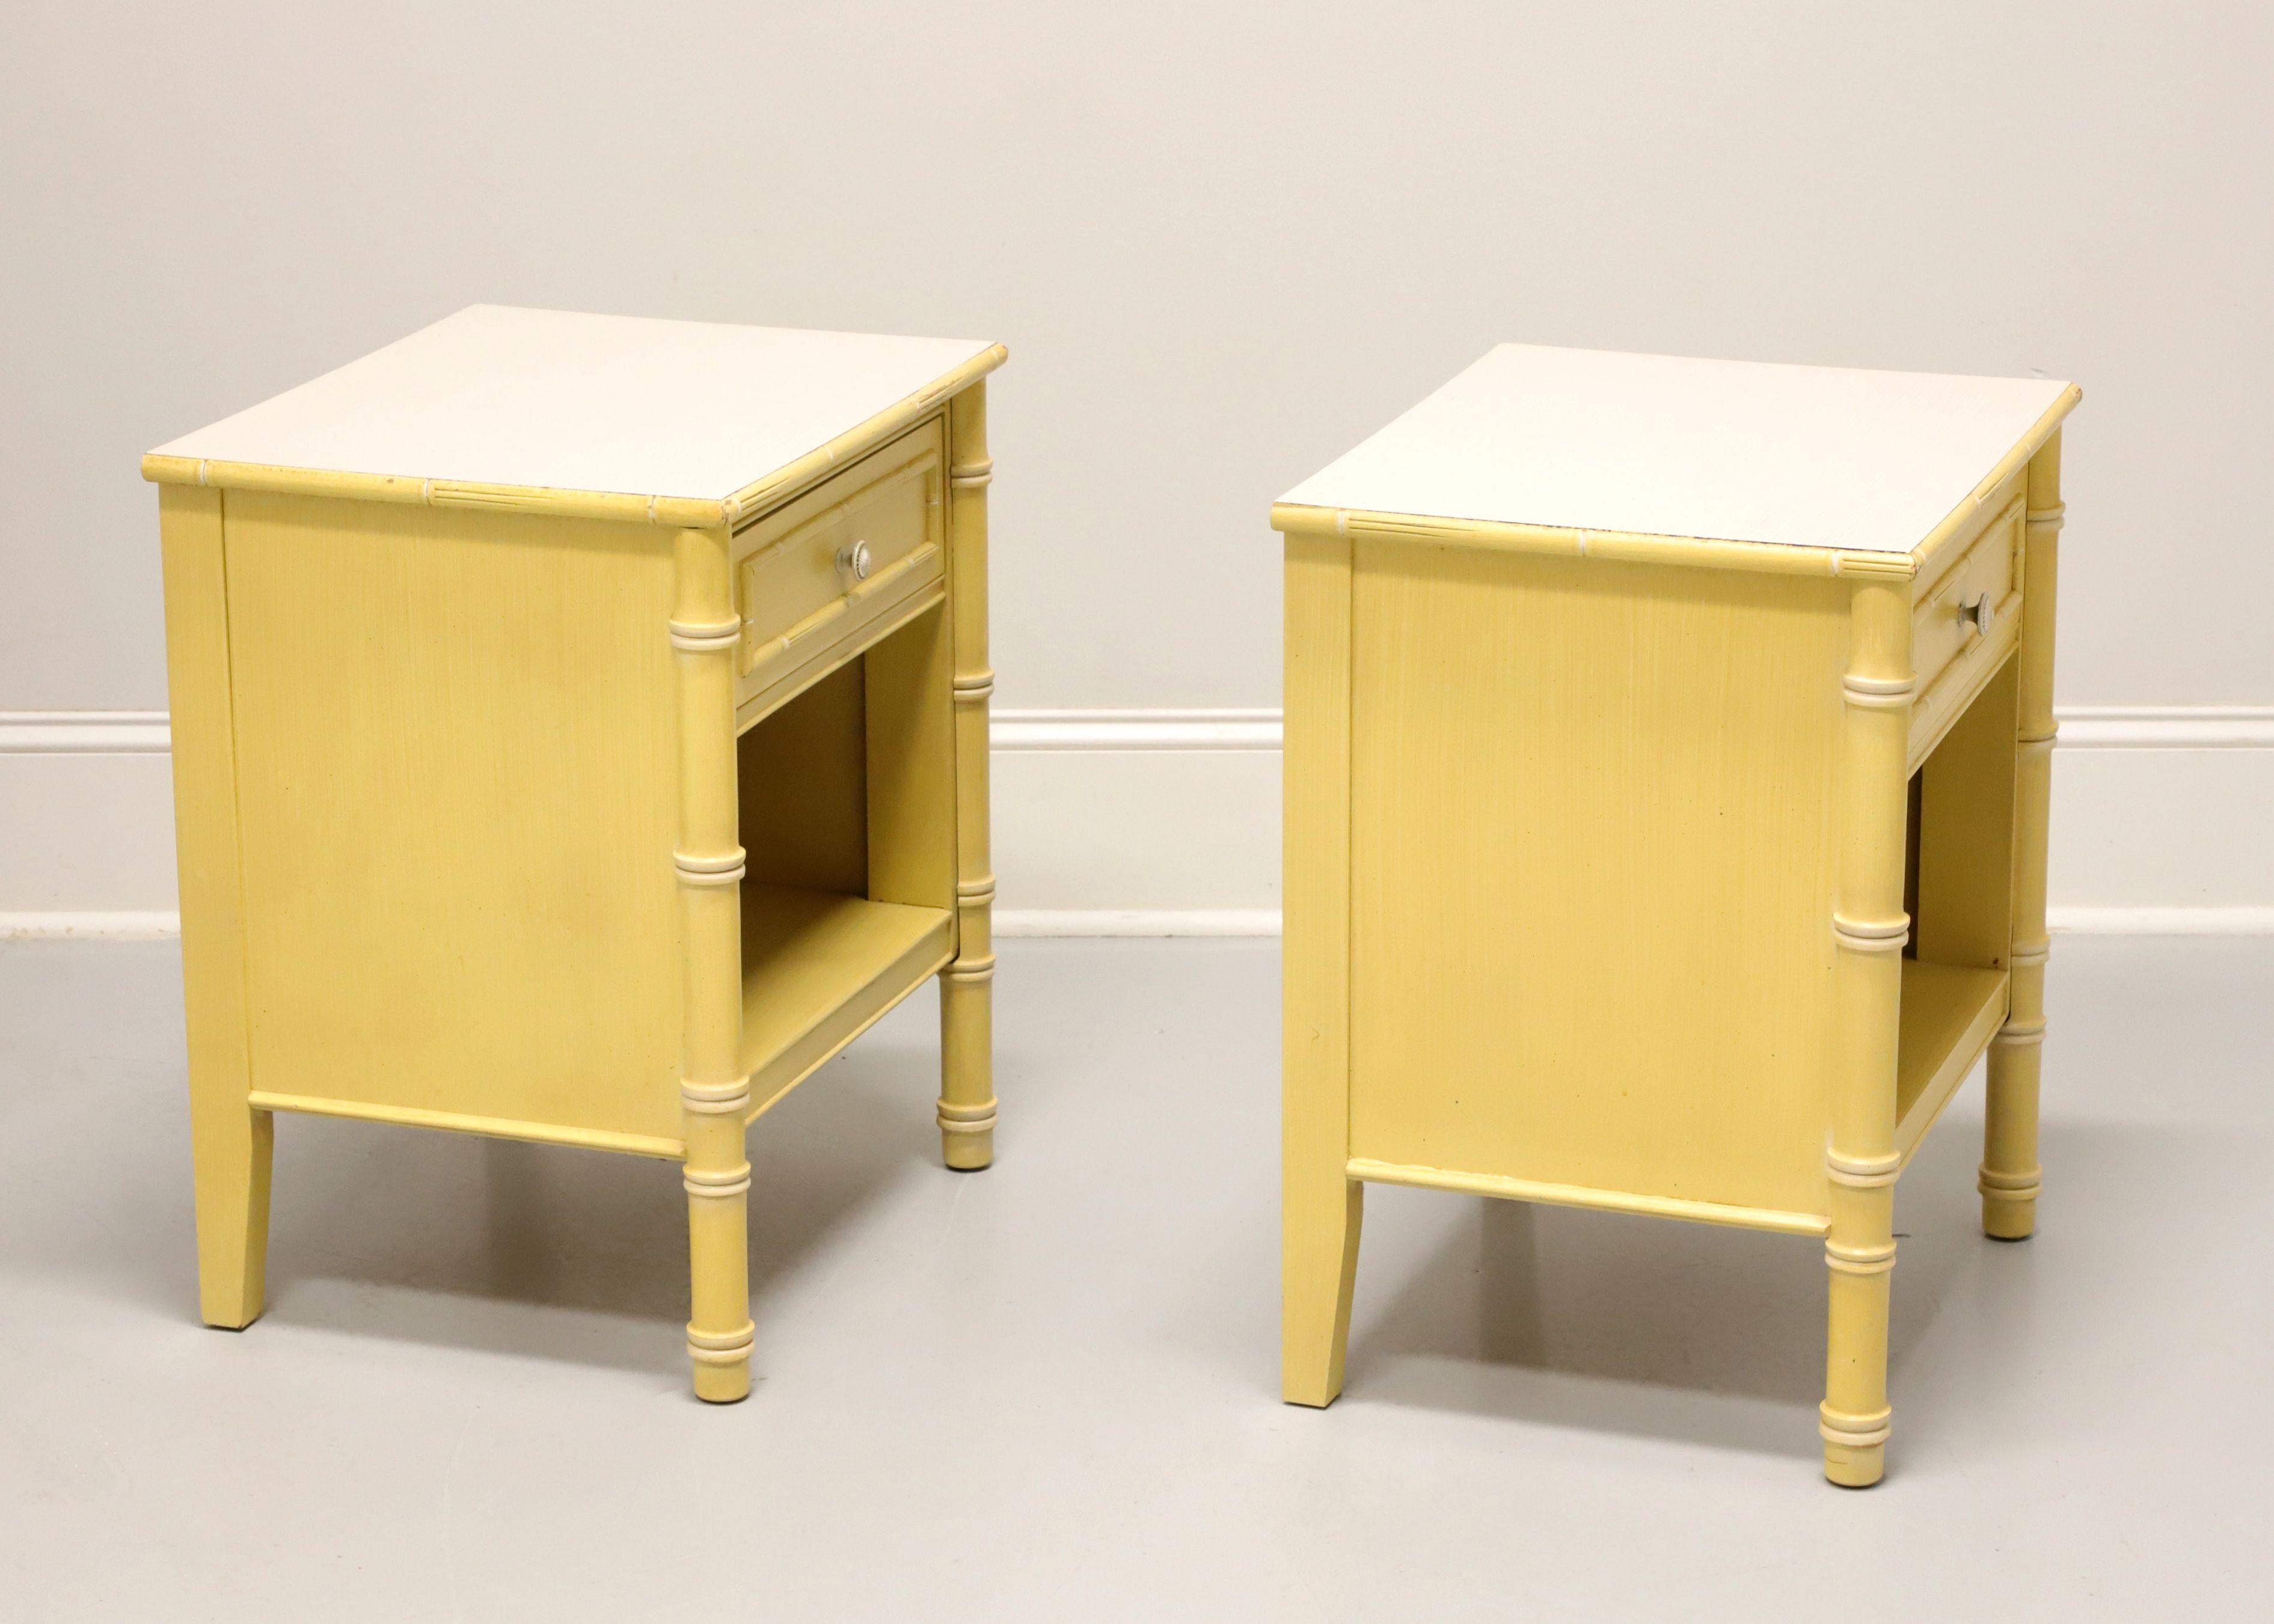 A pair of Asian influenced nightstands, unbranded, similar quality to Drexel or Thomasville. Faux bamboo painted a shade of yellow, white laminate top, antique brass hardware, round faux bamboo styling to front legs and square back legs. Features